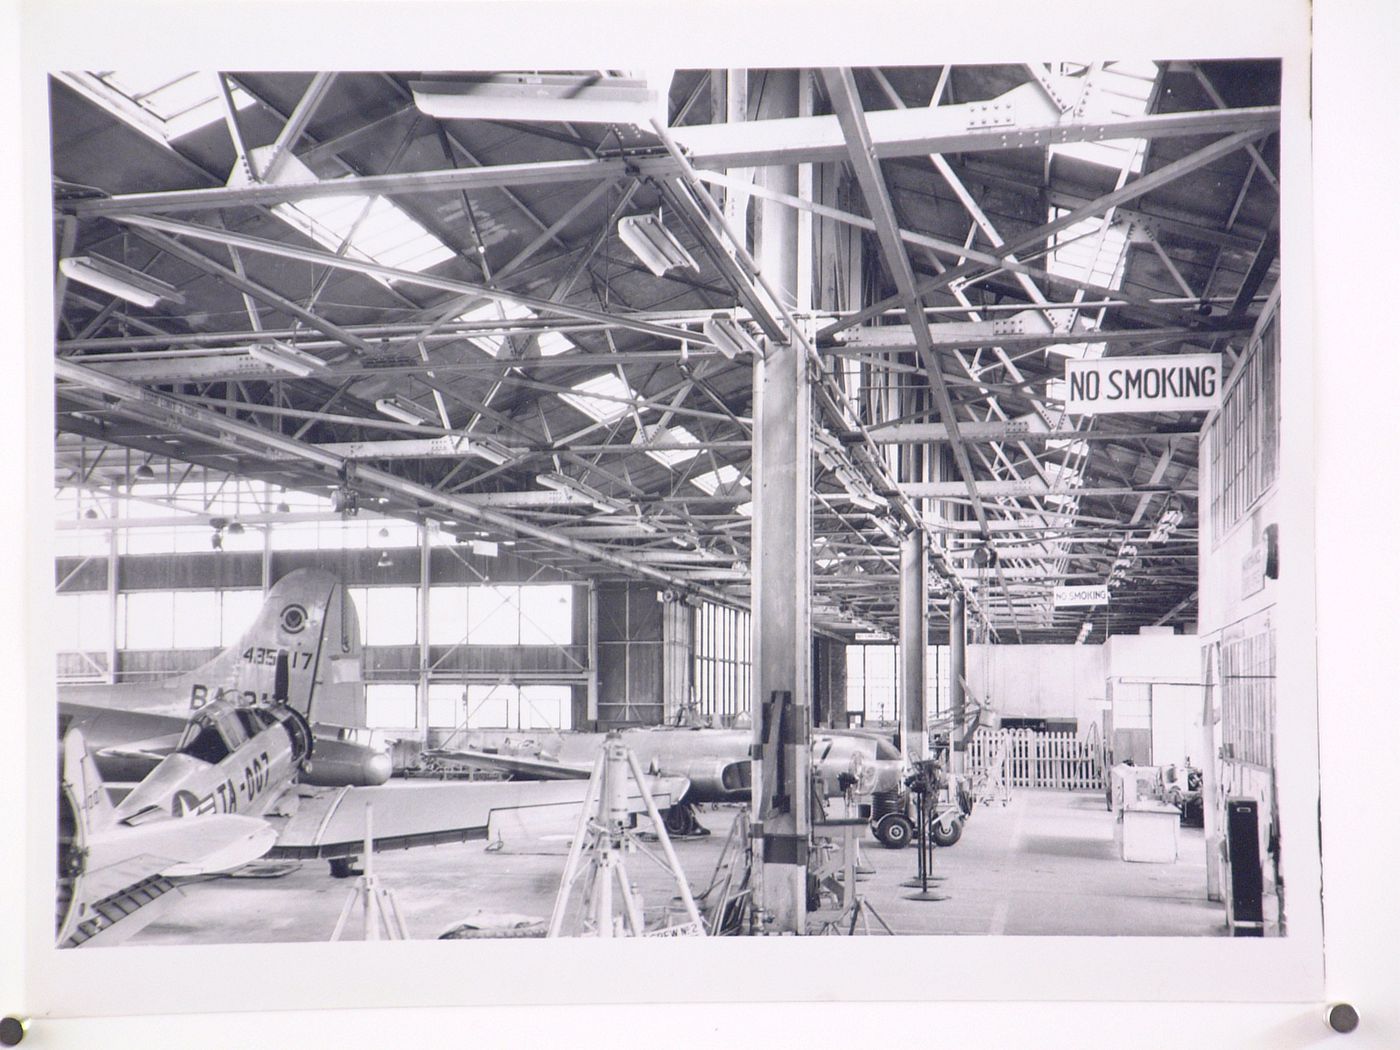 Interior view from the south of a Hangar (also known as Building No. 87), United States Aviation School, Langley Air Force Base, Langley, Virginia